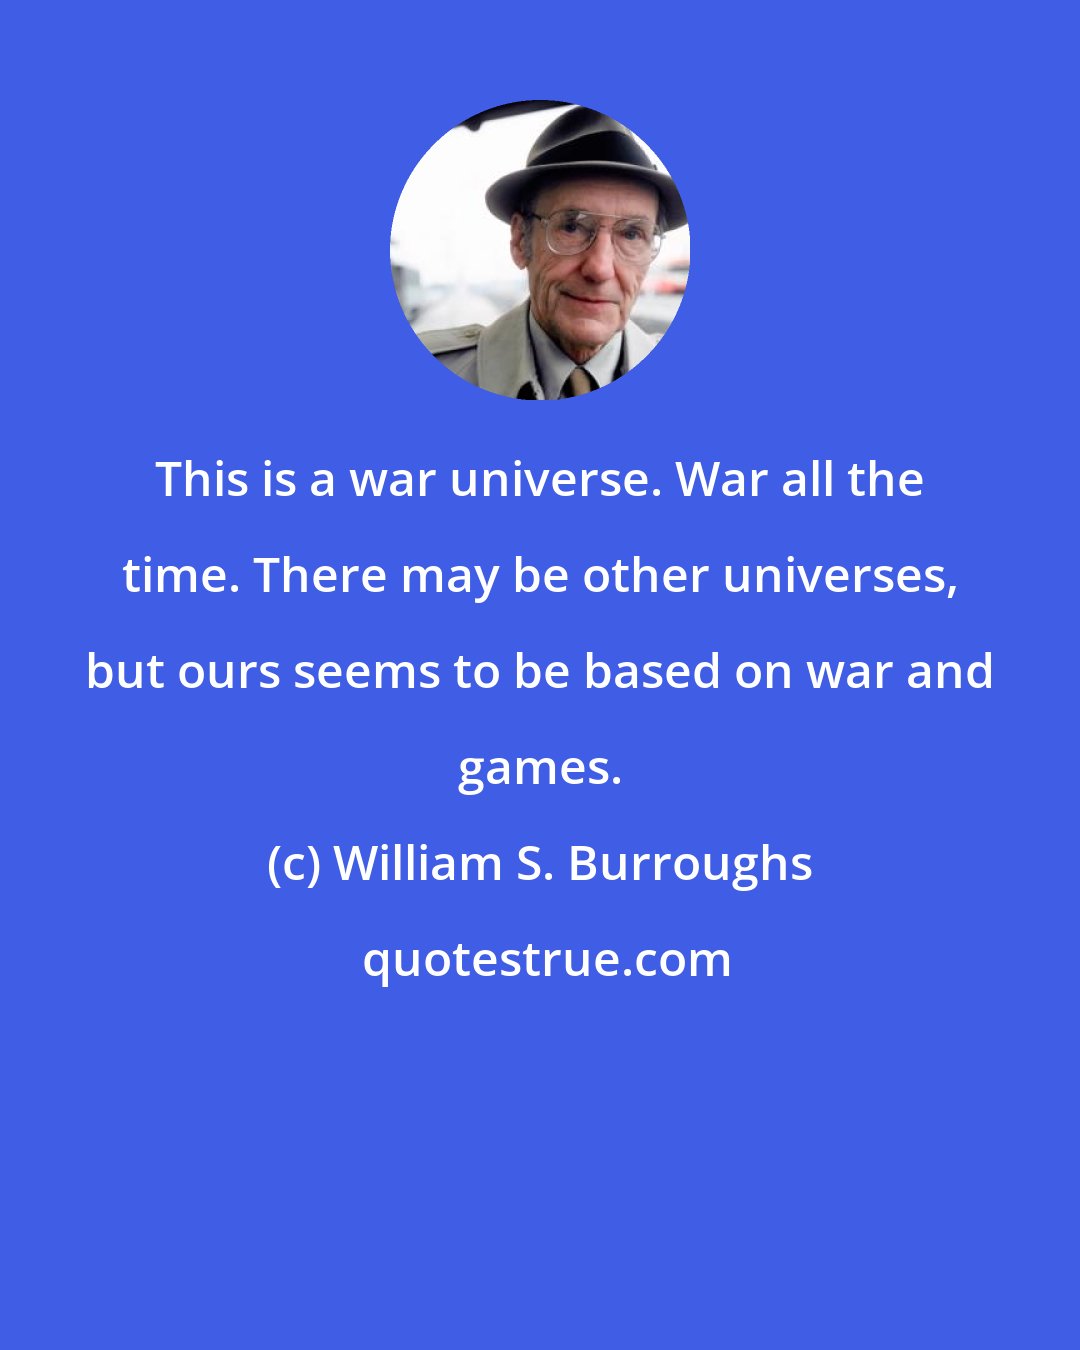 William S. Burroughs: This is a war universe. War all the time. There may be other universes, but ours seems to be based on war and games.